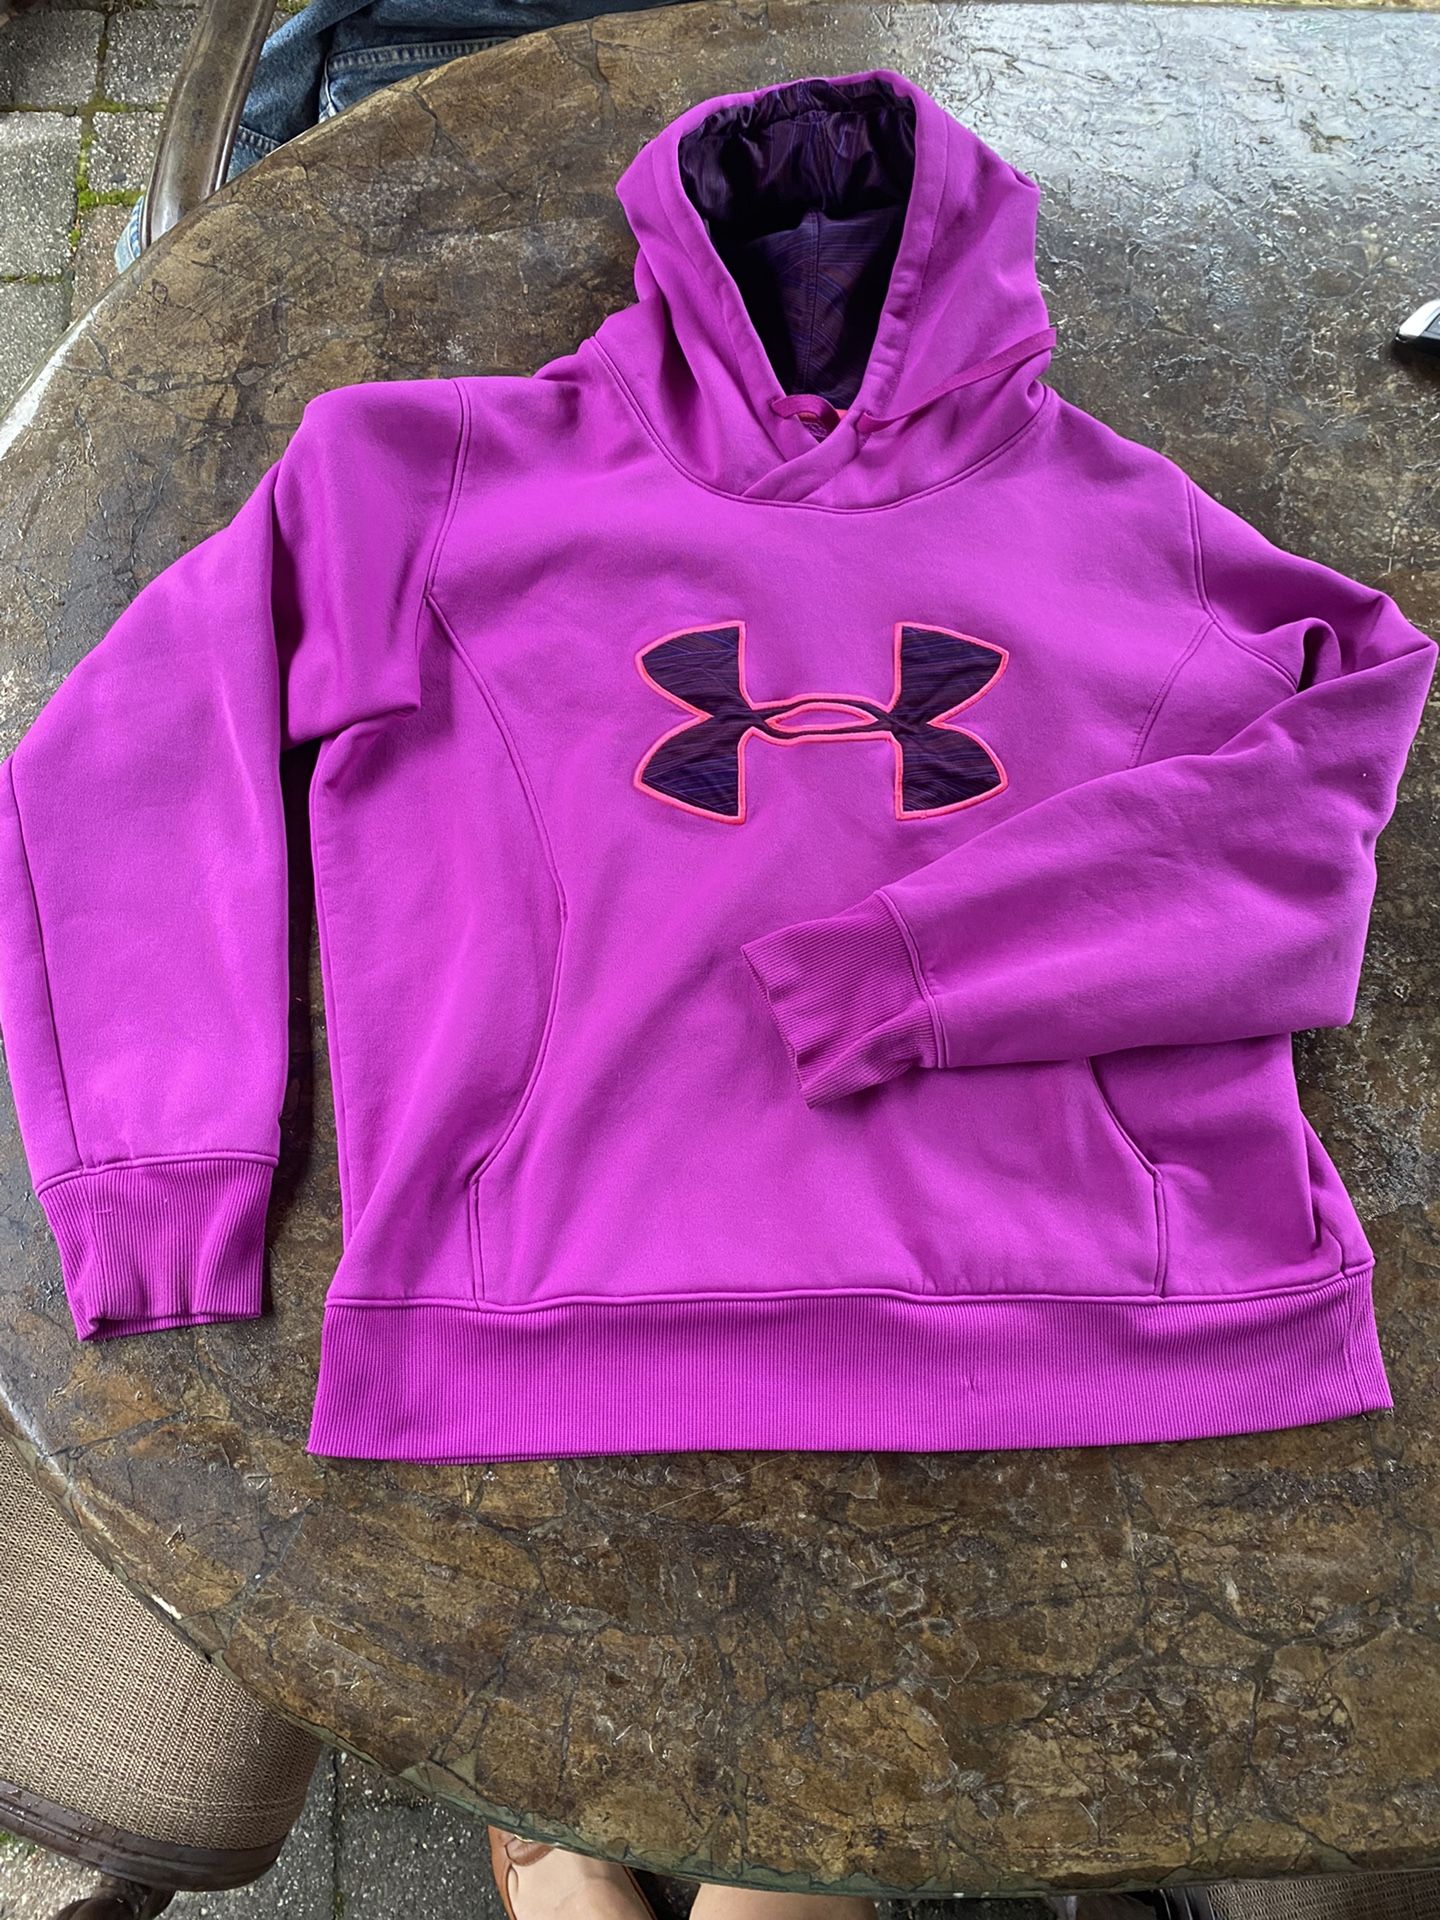 Girls Under Armour Hot Pink Hooded Athletic pullover L